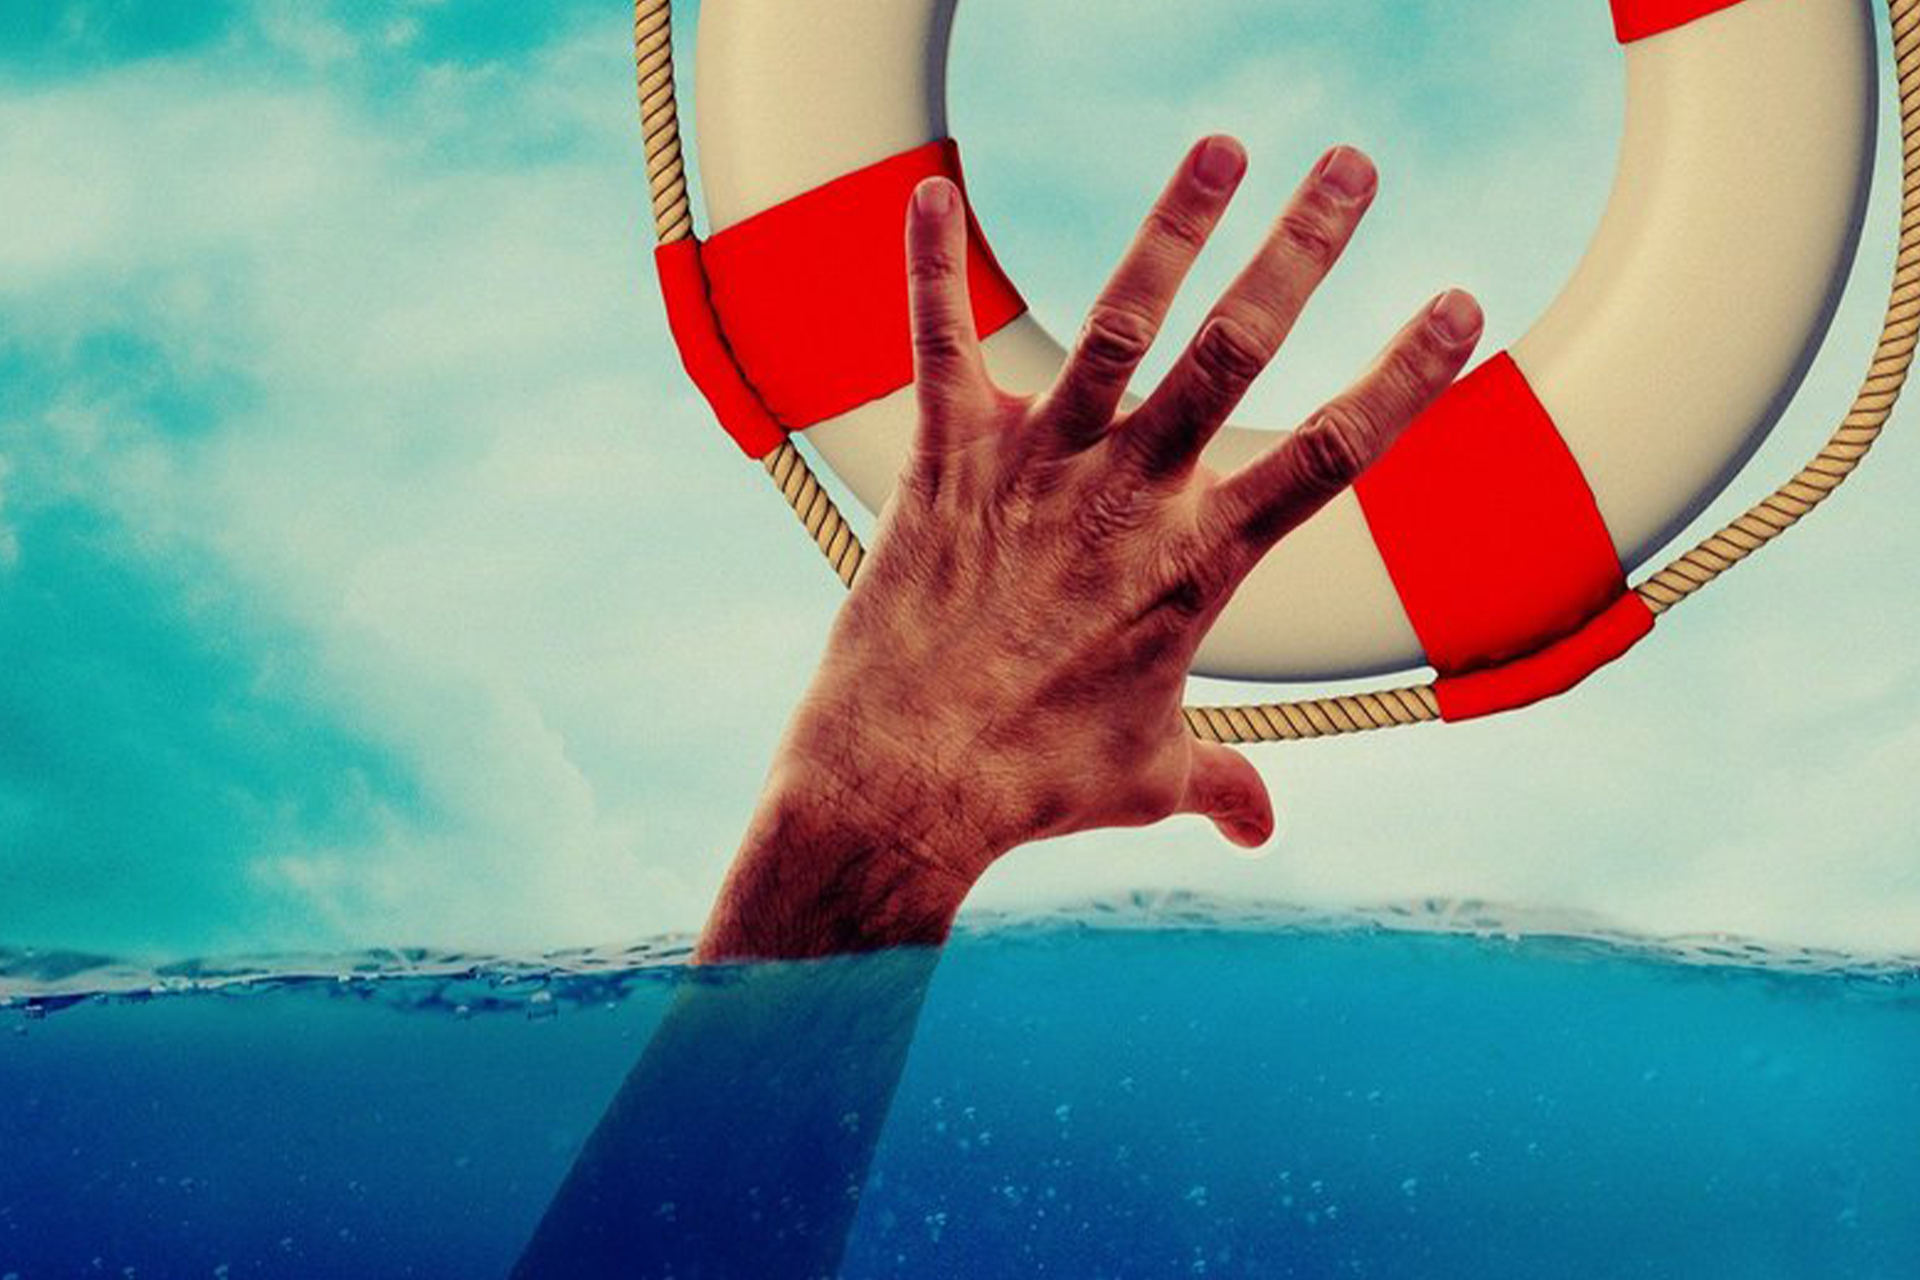 A man's hand reaching out of water for a lifebuoy.